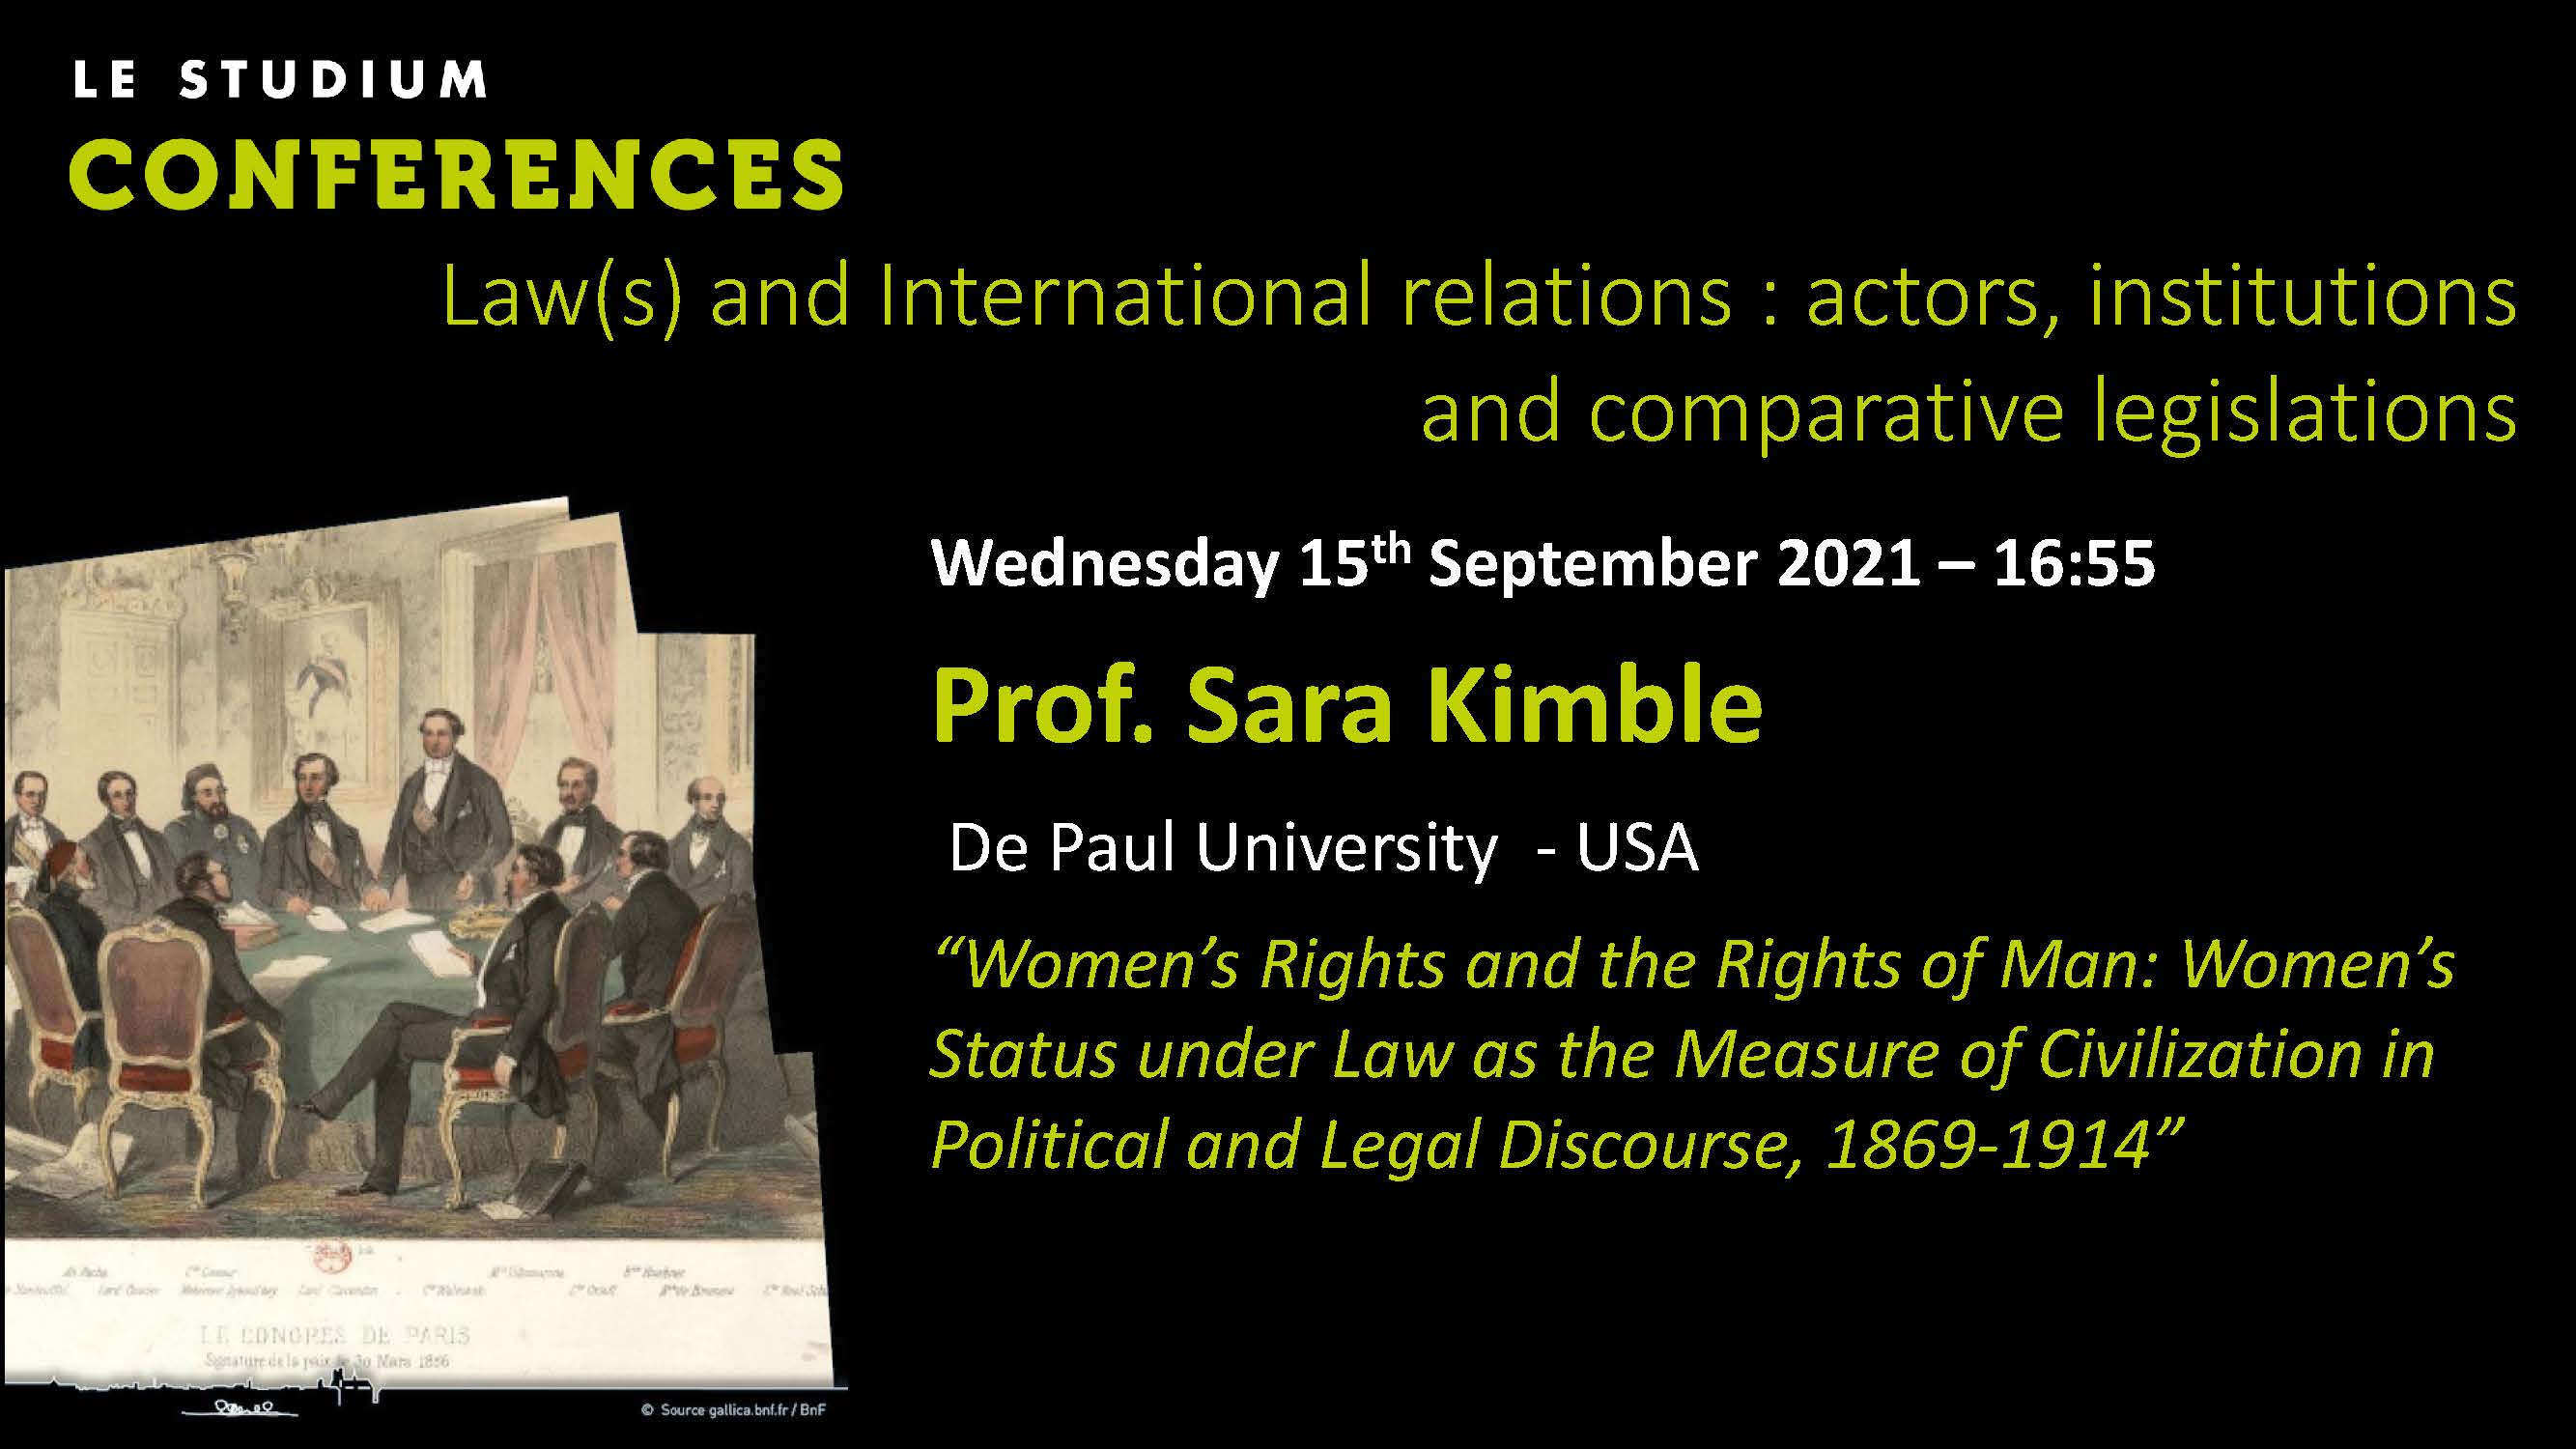 Sara Kimble - Women’s Rights and the Rights of Man: Women’s Status under Law as the Measure of Civilization in Political and Legal Discourse, 1869-1914